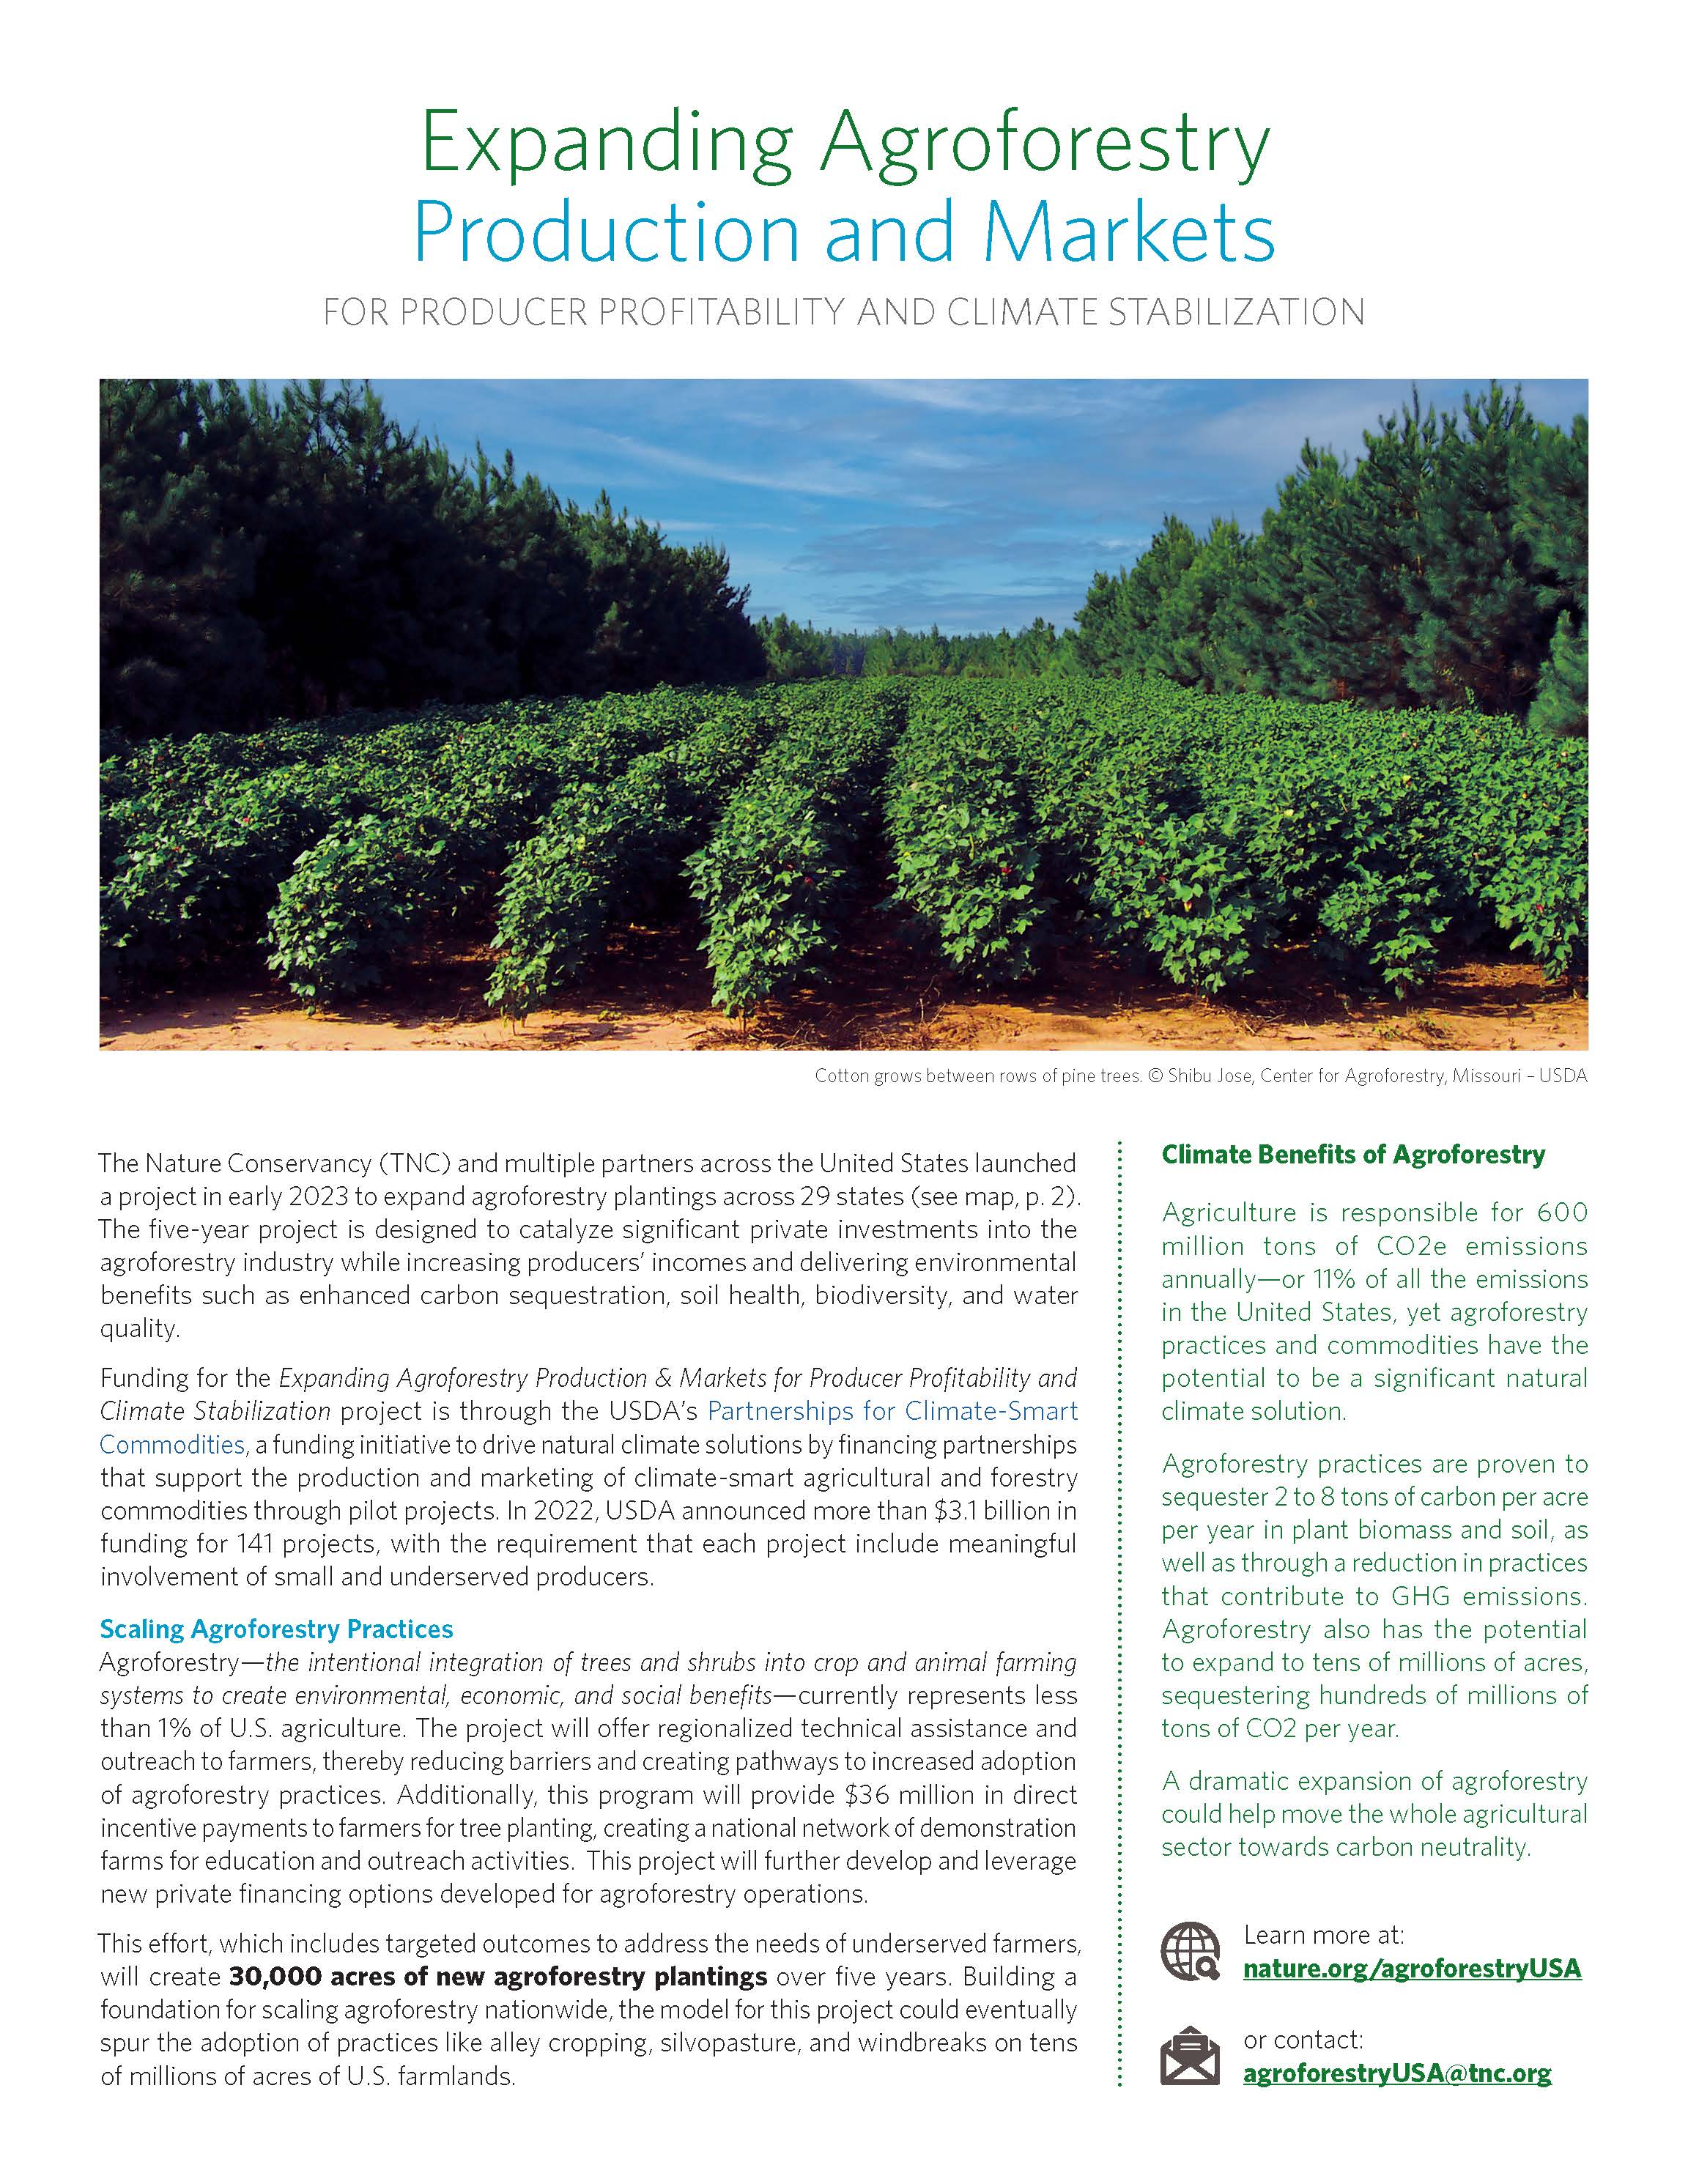 A fact sheet about the Expanding Agroforestry Production and Markets program